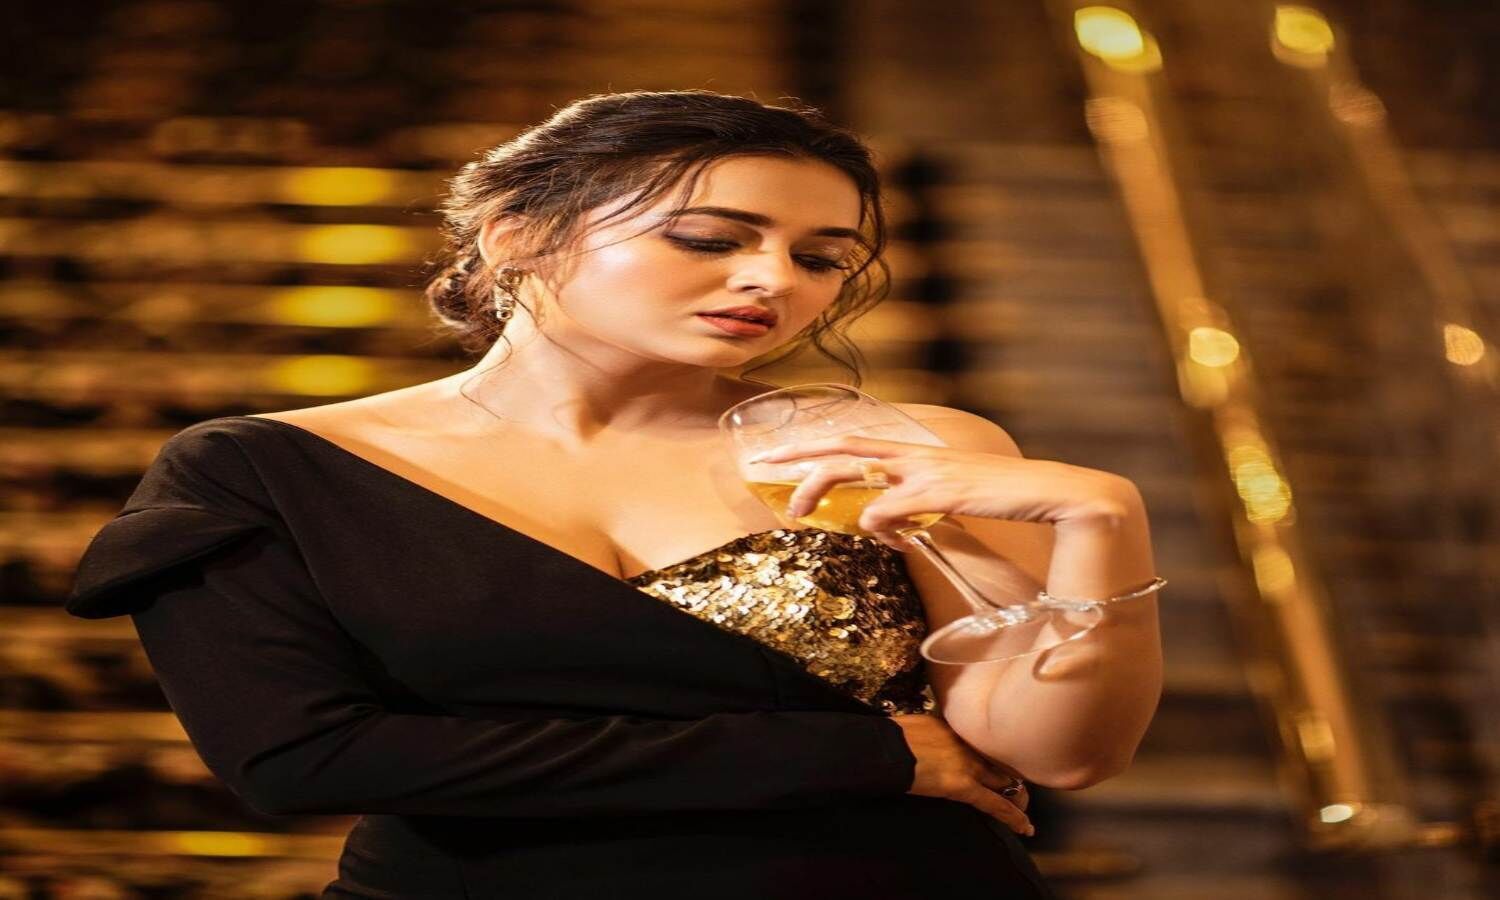 Tejasswi Prakash Beauty Tips: Glowing skin of stunning light is the secret of these beauty tips, you should also try